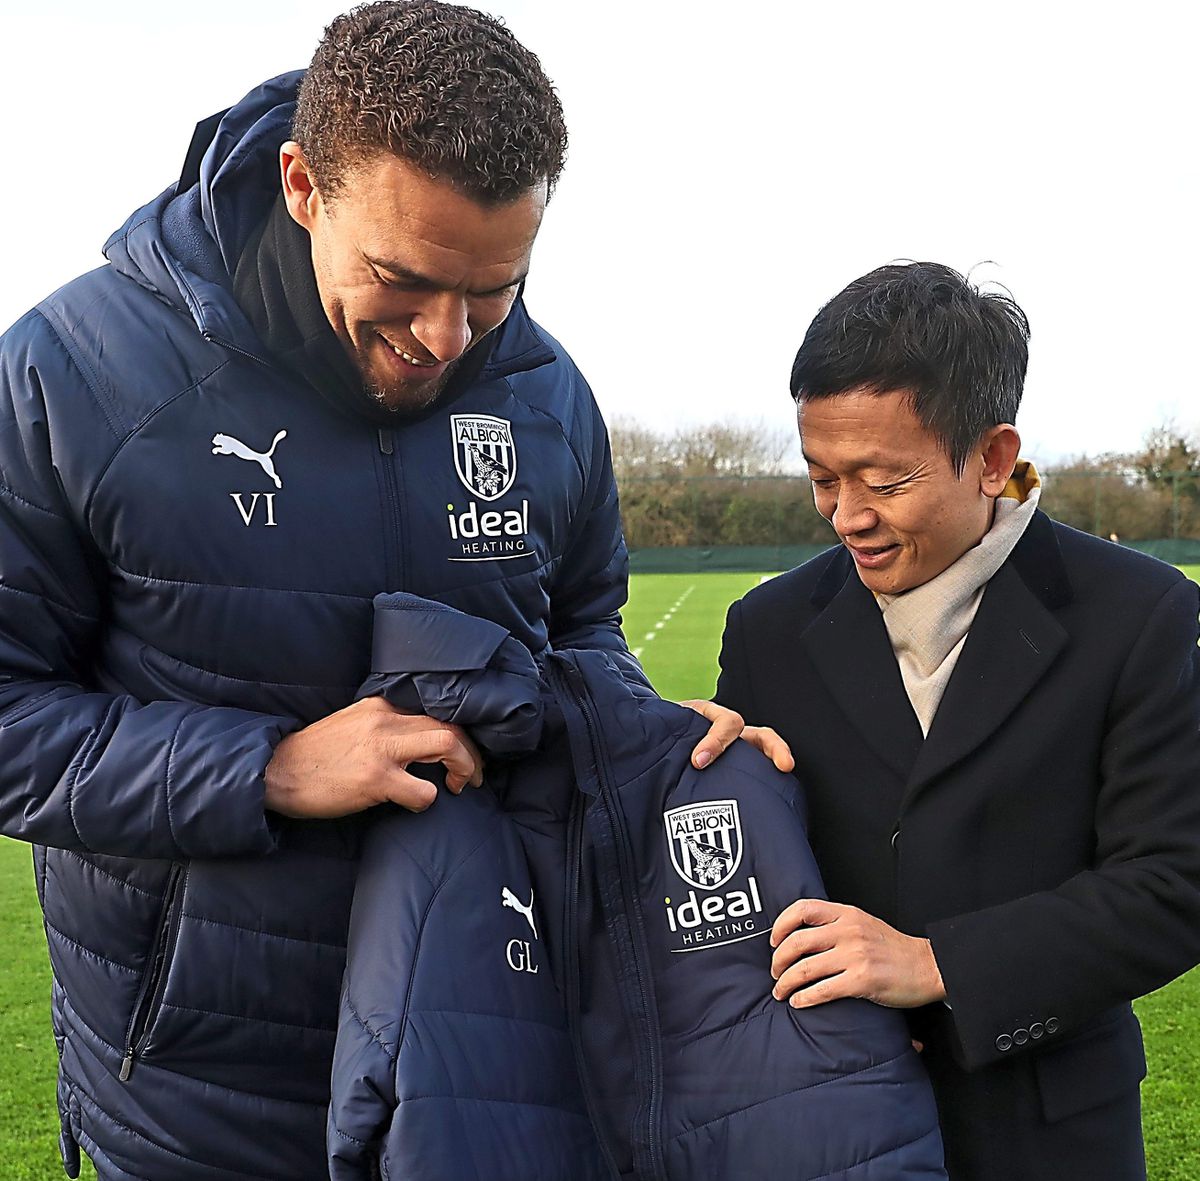 WALSALL, ENGLAND - DECEMBER 15: Valerien Ismael Head Coach / Manager of West Bromwich Albion gives a bench coat to Guochuan Lai Owner / Controlling Shareholder of West Bromwich Albion at West Bromwich Albion Training Ground on December 15, 2021 in Walsall, England. (Photo by Adam Fradgley/West Bromwich Albion FC via Getty Images).